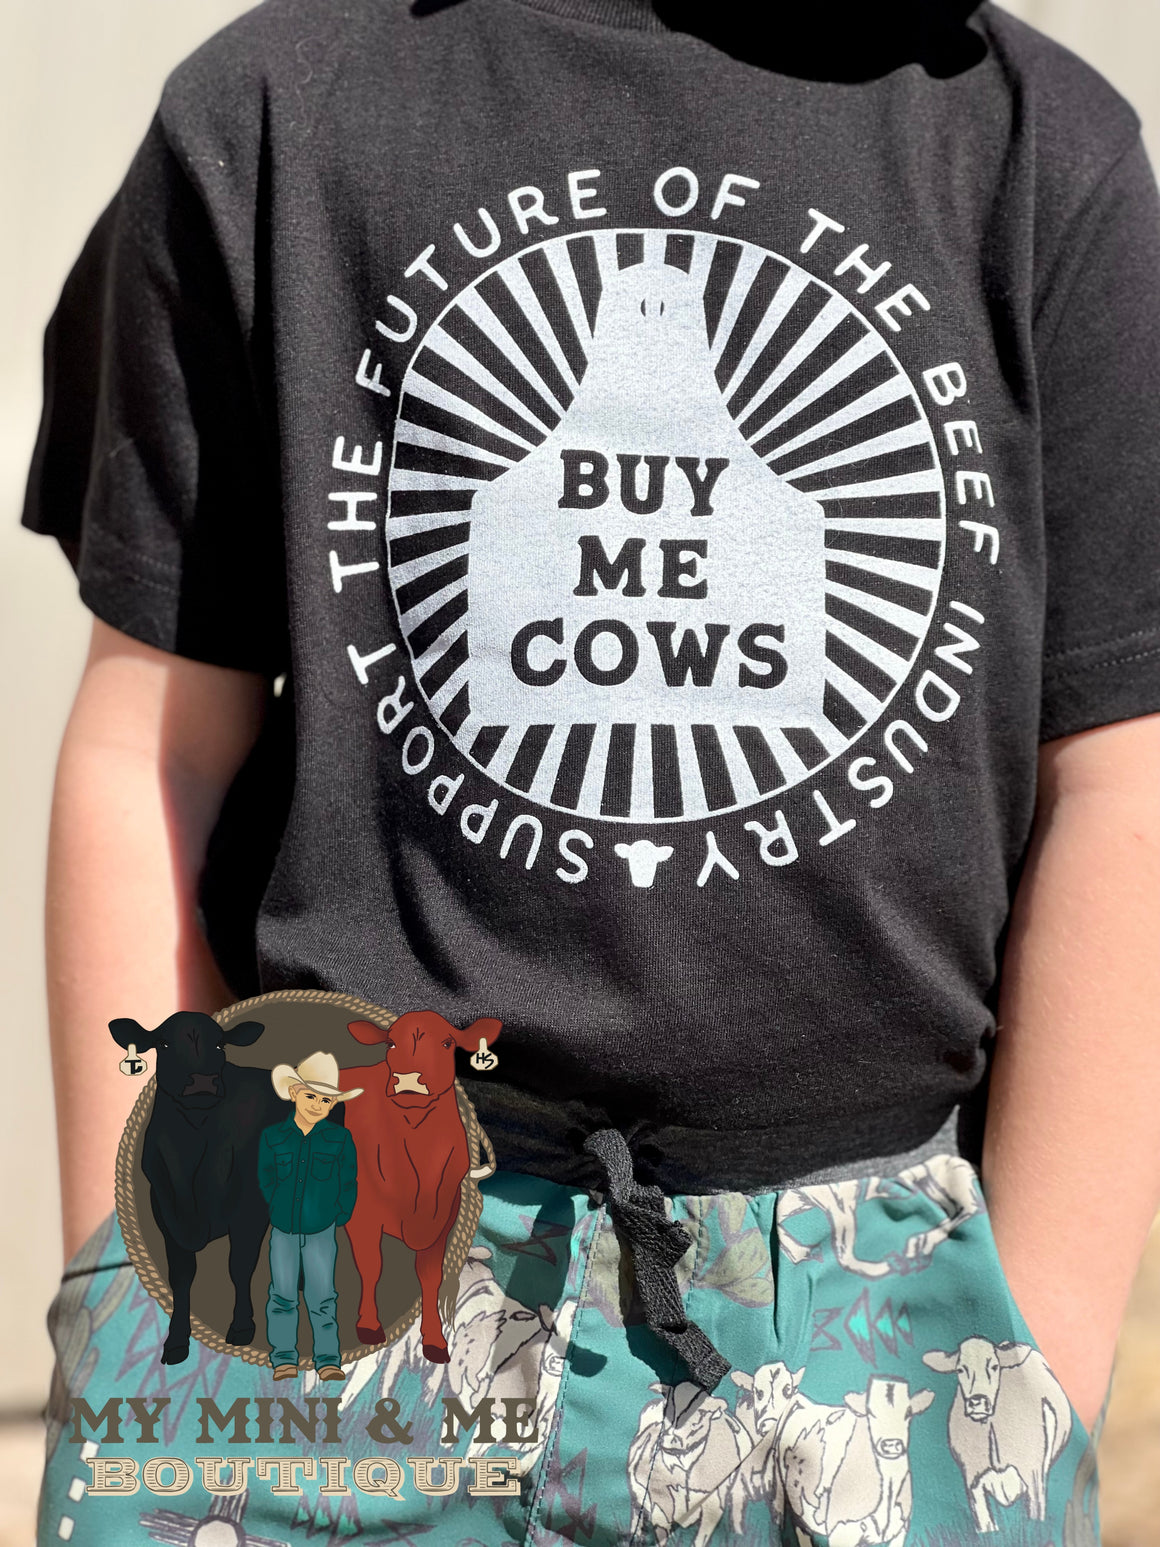 Support The Future Of The Beef Industry